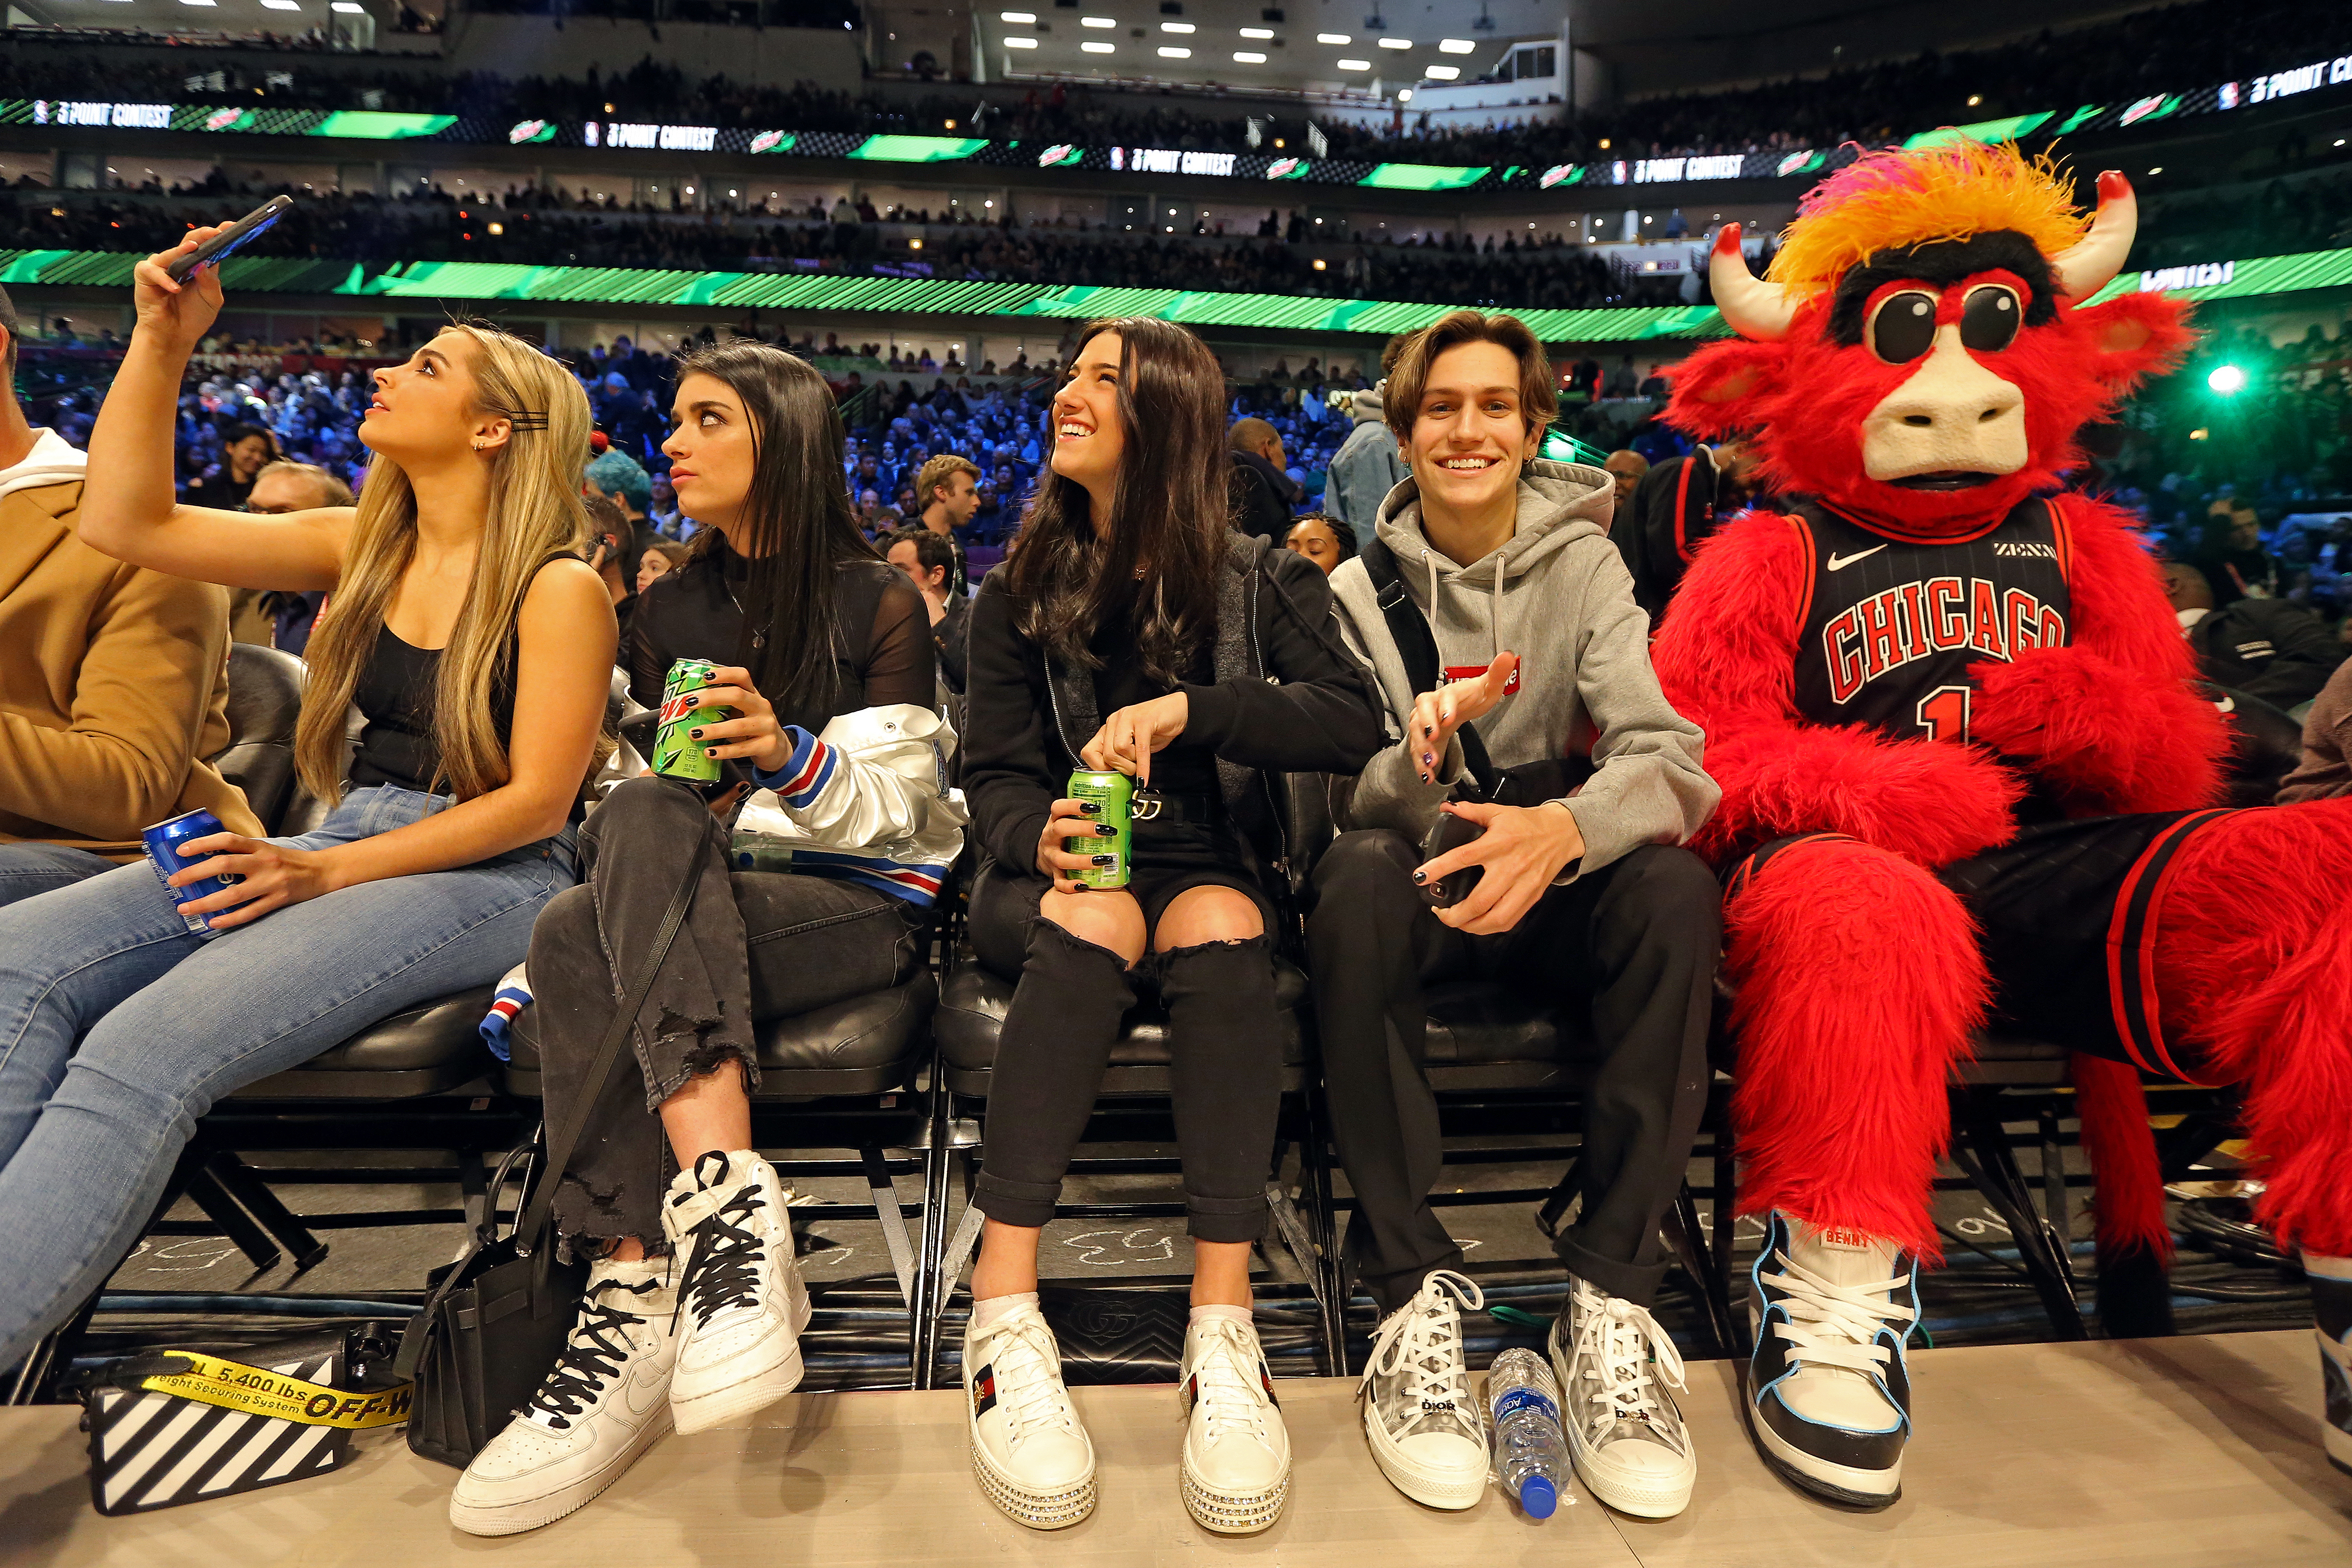 Teen TikTok celebrities sit on the sidelines at the 2020 NBA All-Star Game in Chicago.